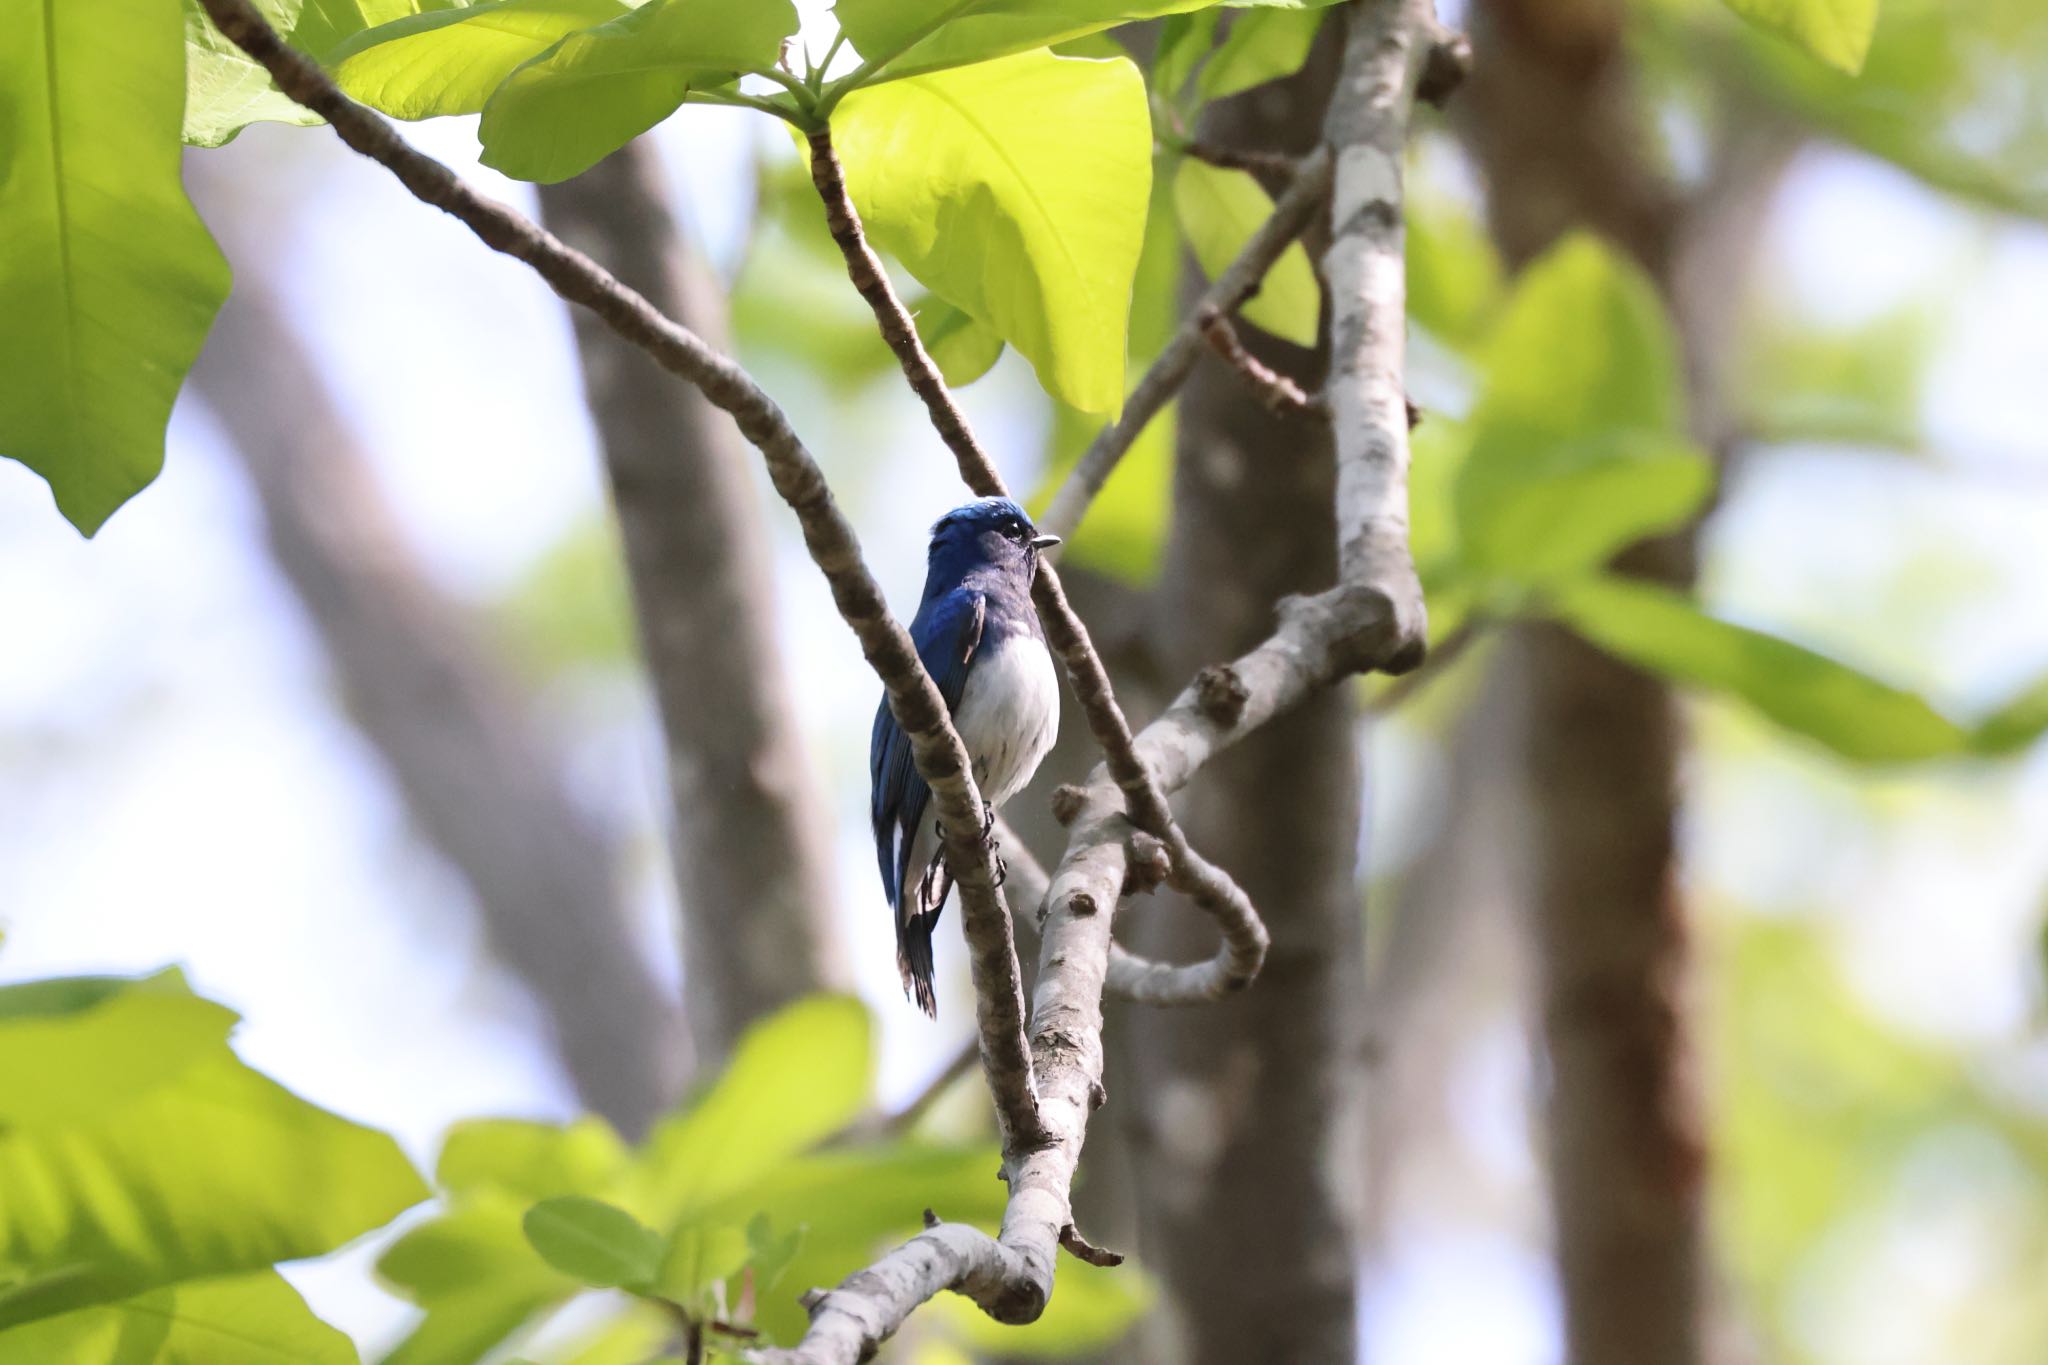 Photo of Blue-and-white Flycatcher at Nishioka Park by will 73